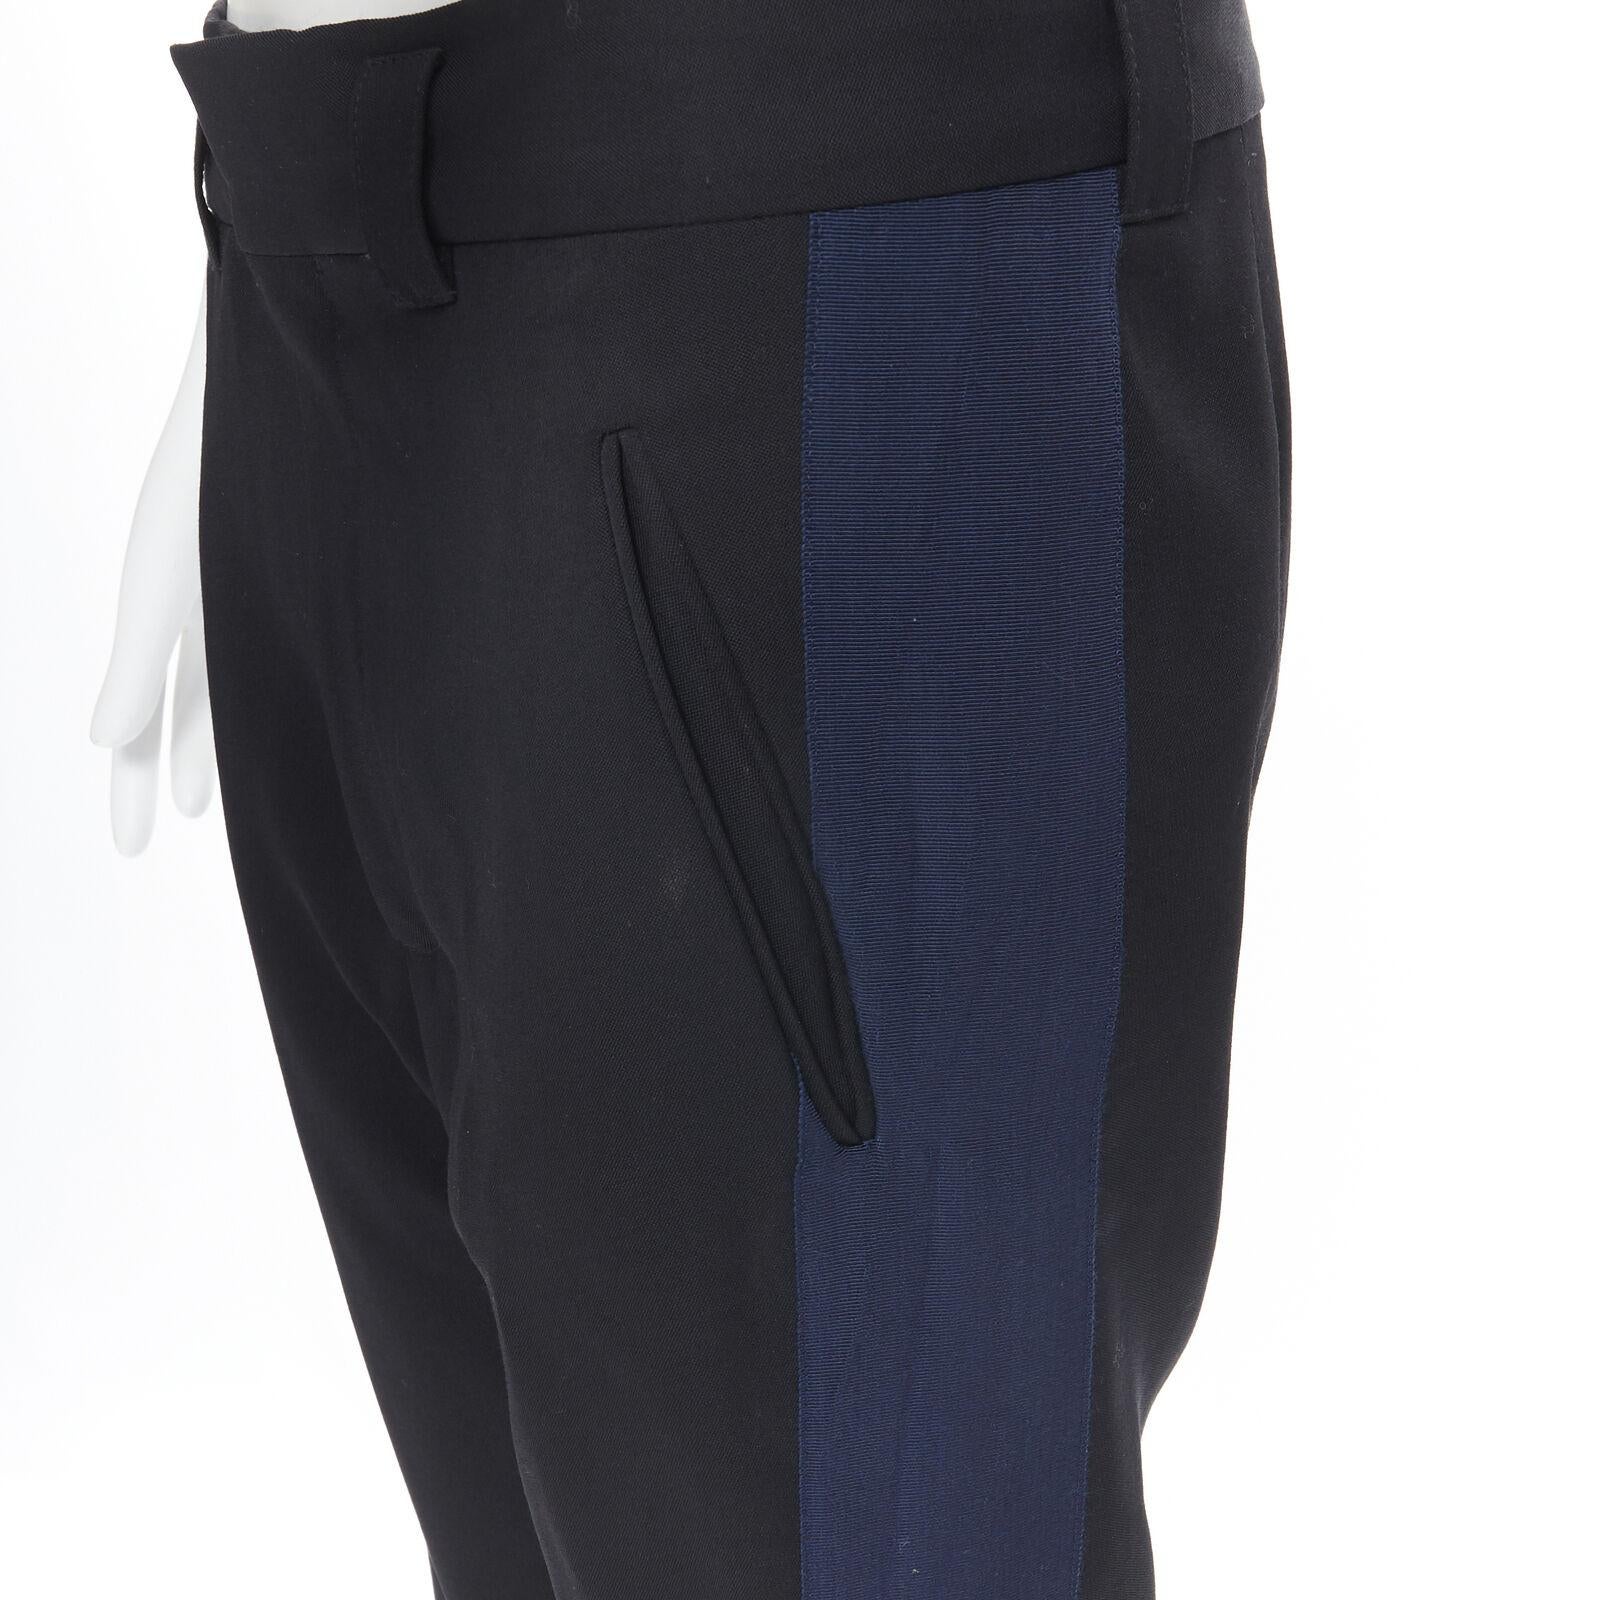 HAIDER ACKERMANN 100% fleece wool black navy grosgrain side cropped pants FR36
Reference: CNLE/A00113
Brand: Haider Ackermann
Designer: Haider Ackermann
Model: Cropped pants
Material: Wool
Color: Black, Blue
Pattern: Solid
Closure: Zip
Extra